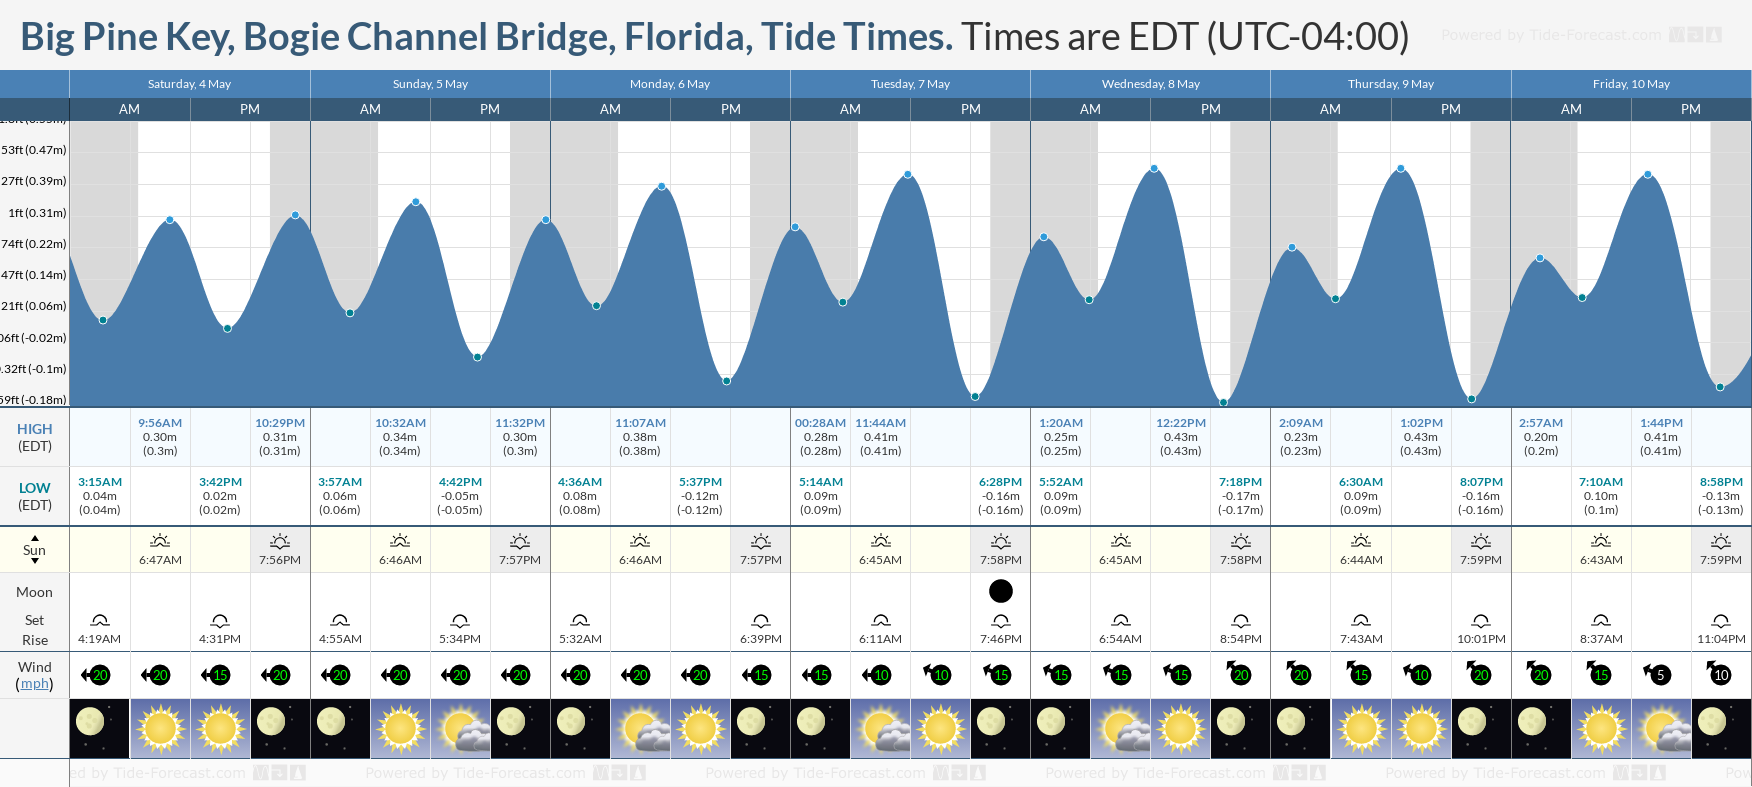 Big Pine Key, Bogie Channel Bridge, Florida Tide Chart including high and low tide tide times for the next 7 days